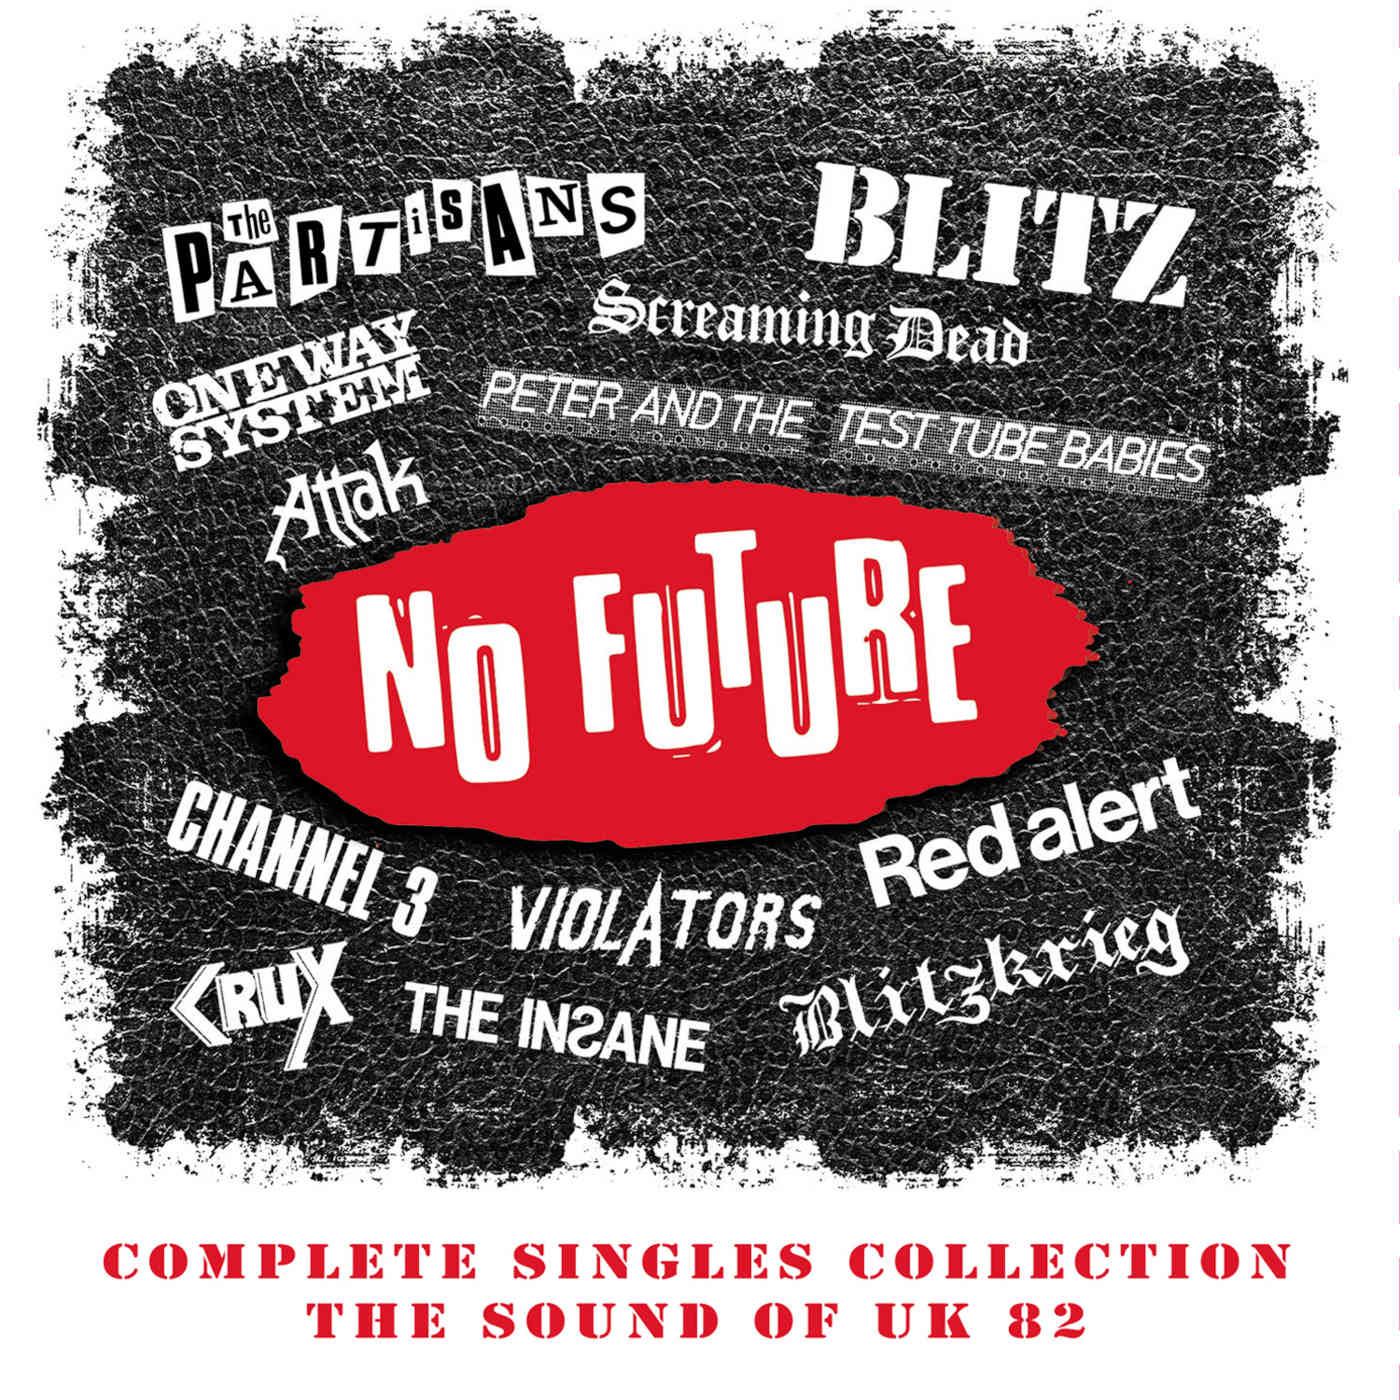 VA - No Future - Complete Singles Collection. The Sounds Of UK 82 (2020) (4CD) (Punk)